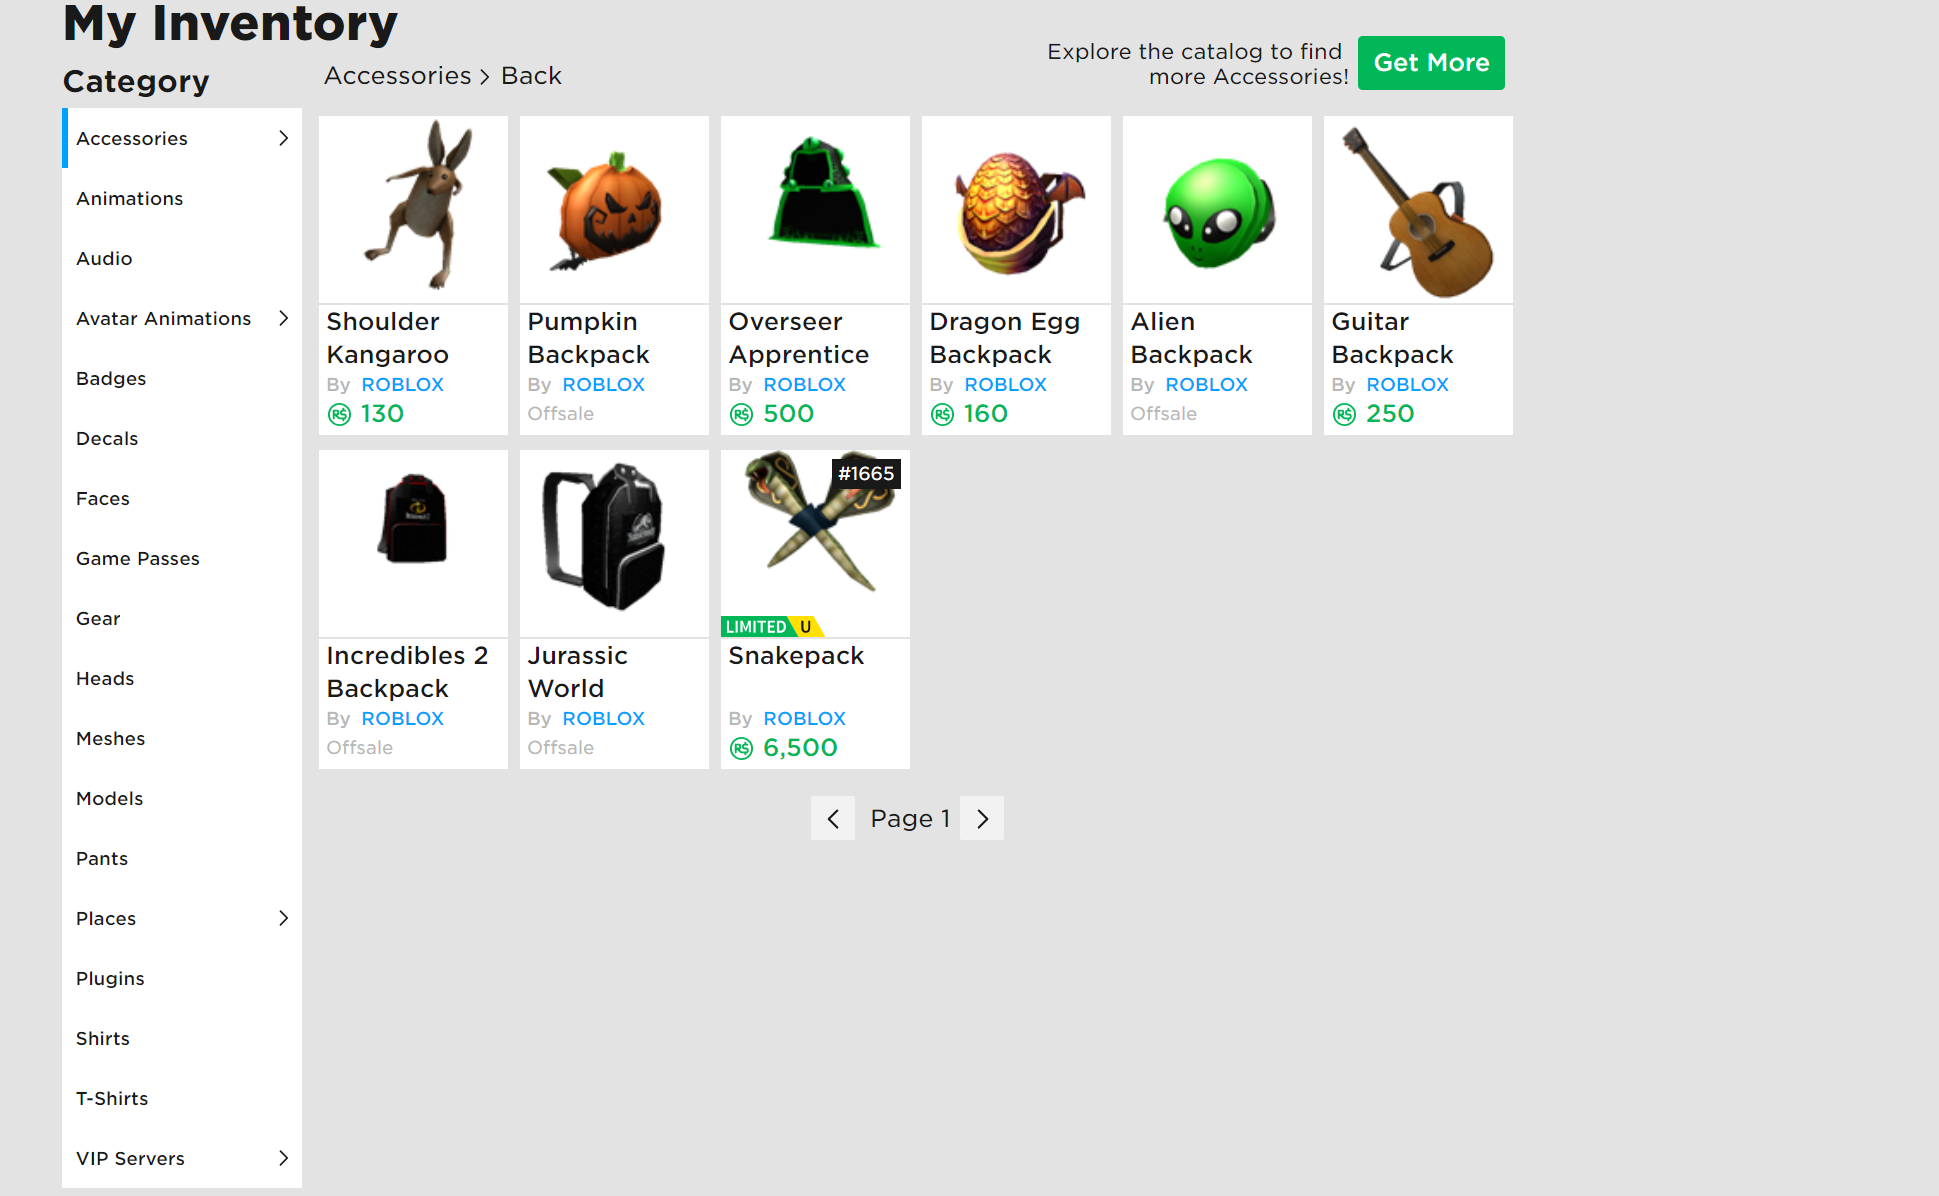 How To Get Alien Backpack In Roblox